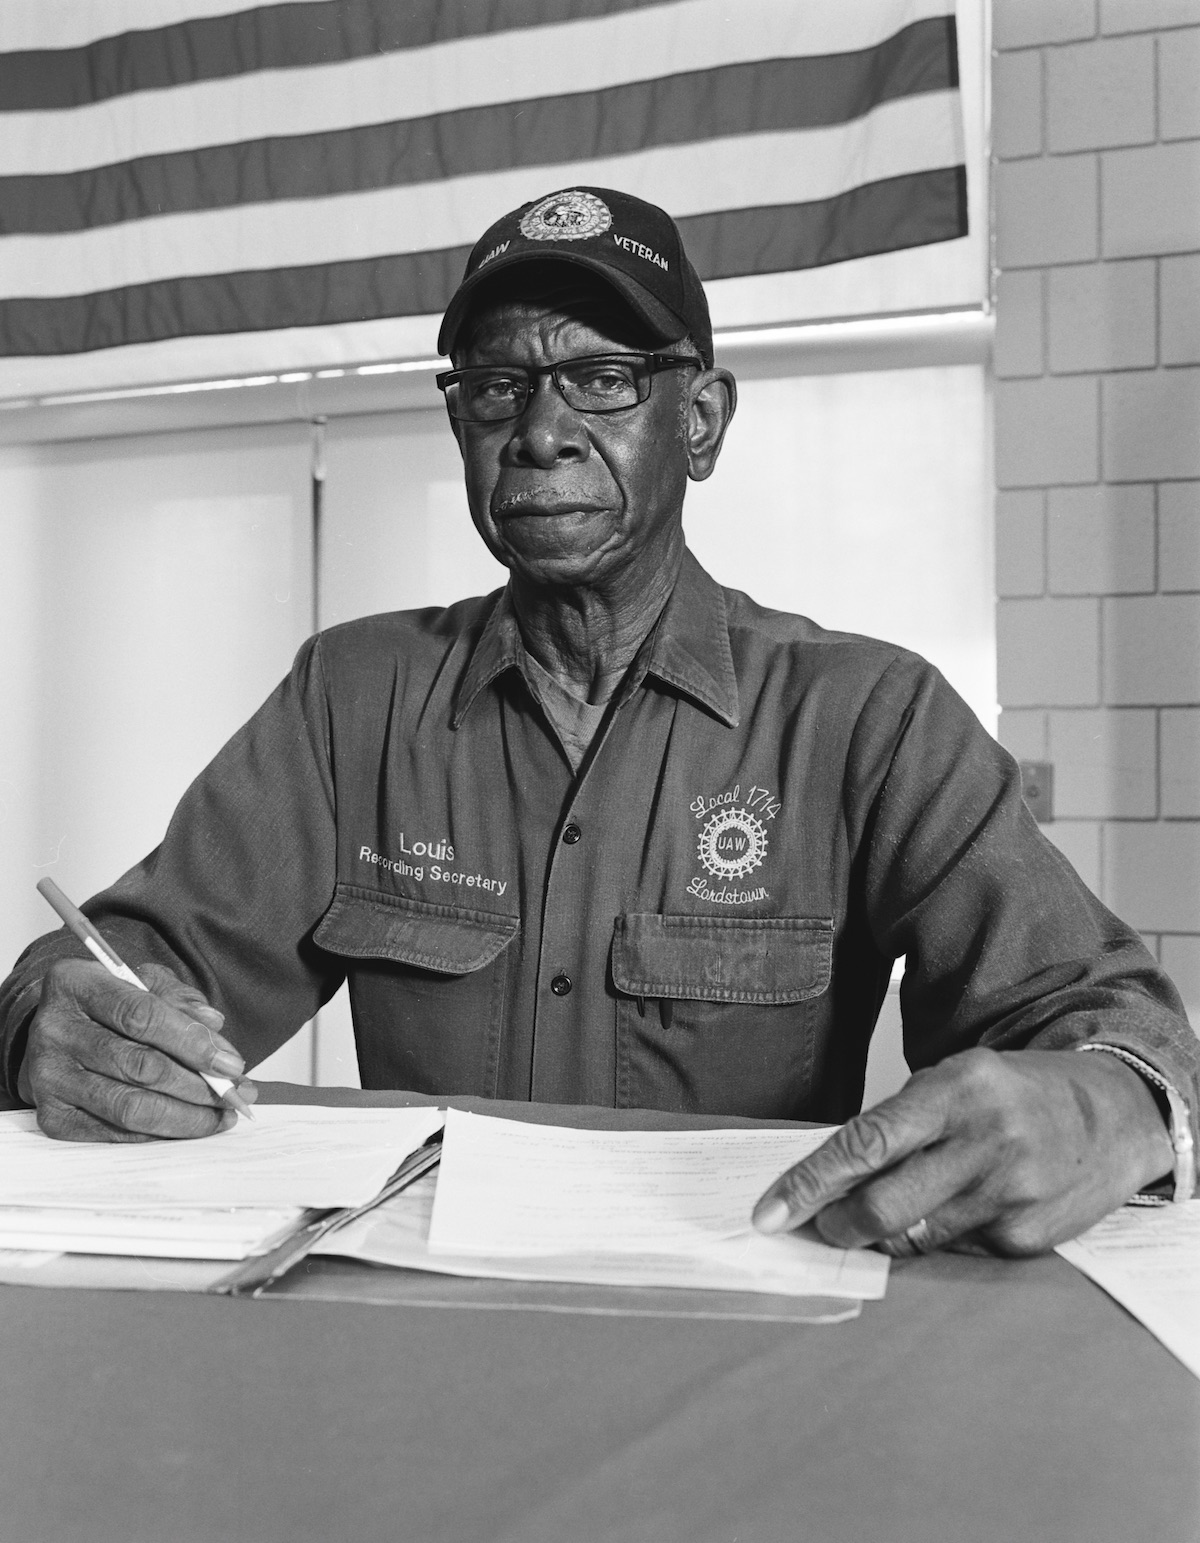 LaToya Ruby Frazier, 'Louis Robinson Jr., Local 1714 Recording Secretary, at UAW Local 1112 Reuther, Scandy, Alli union hall (retiree, 34 years in at GM Lordstown Assembly, die setter), Lordstown OH,' 2019.